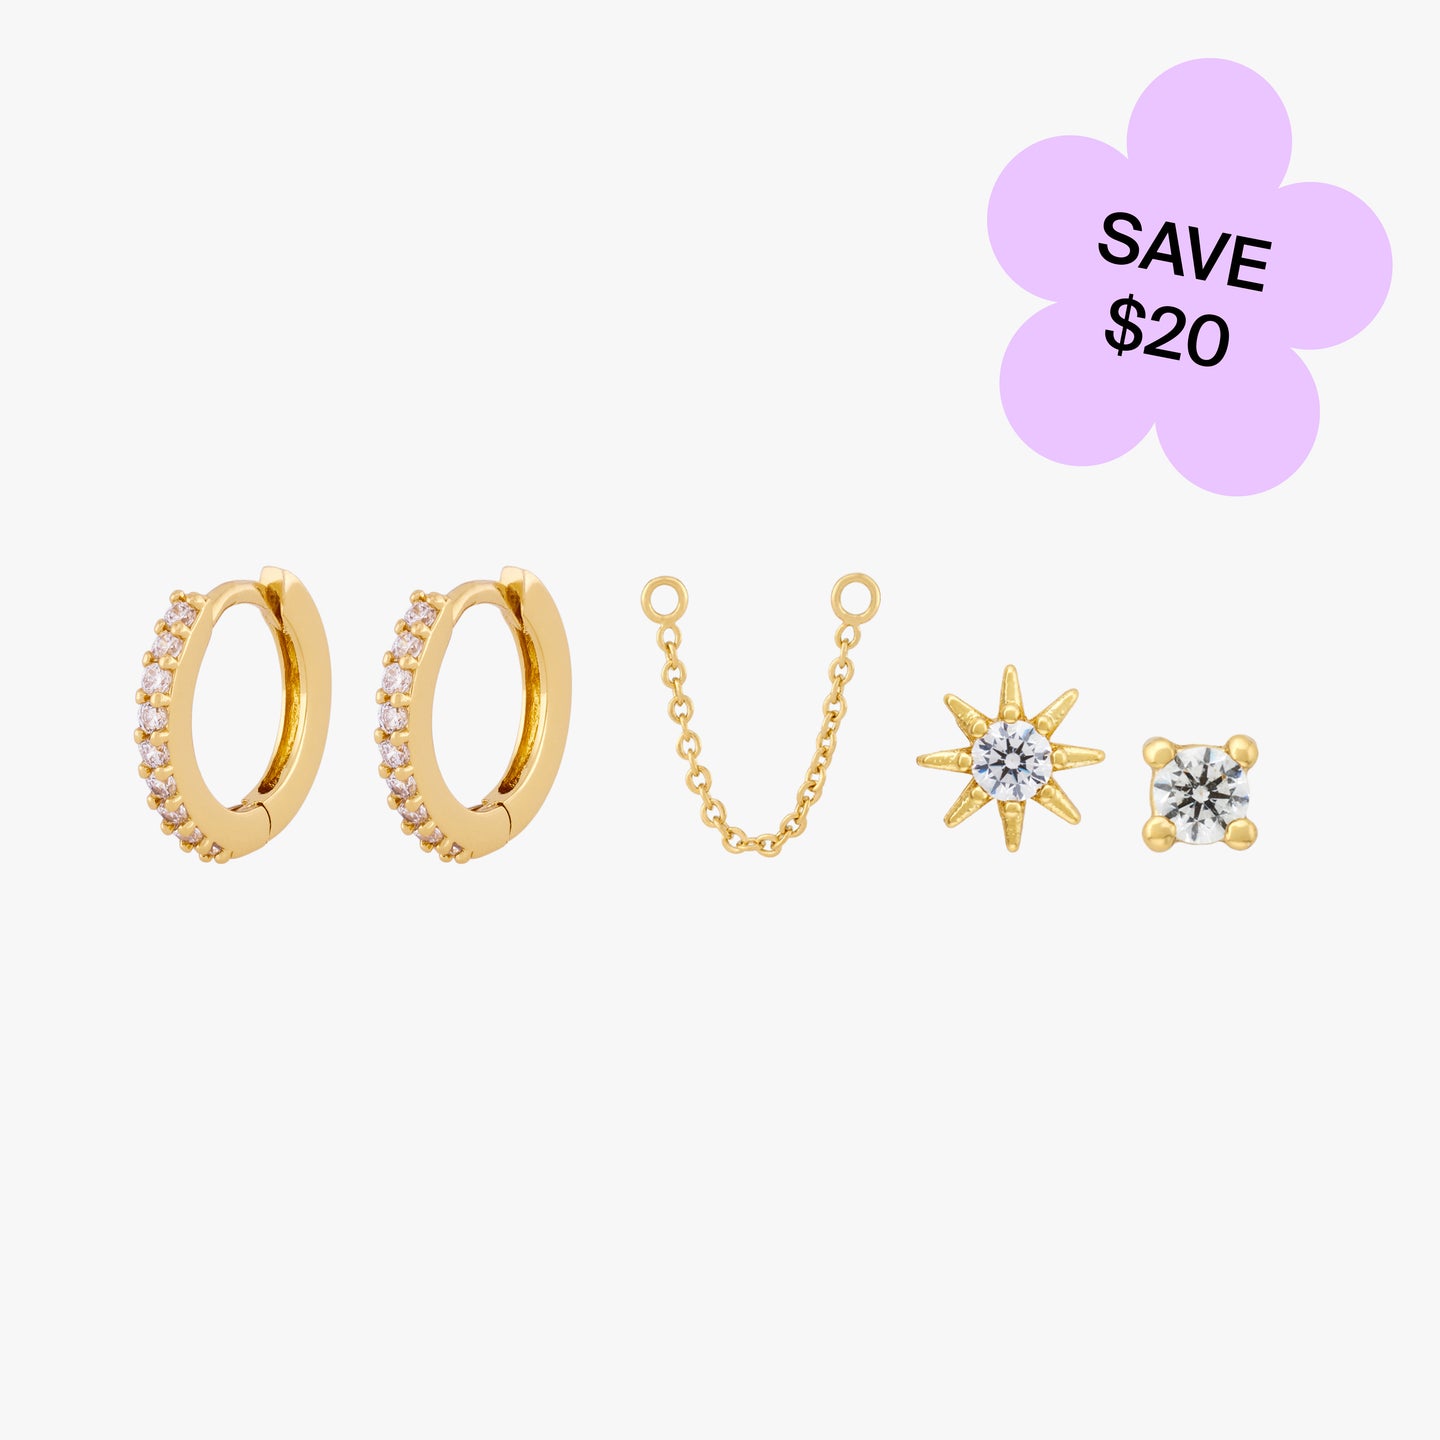 A set containing a pair of gold/clear mini pave huggies, a 30mm gold chain, a gold/clear starburst stud, and a gold/clear mini cz stud color:null|gold